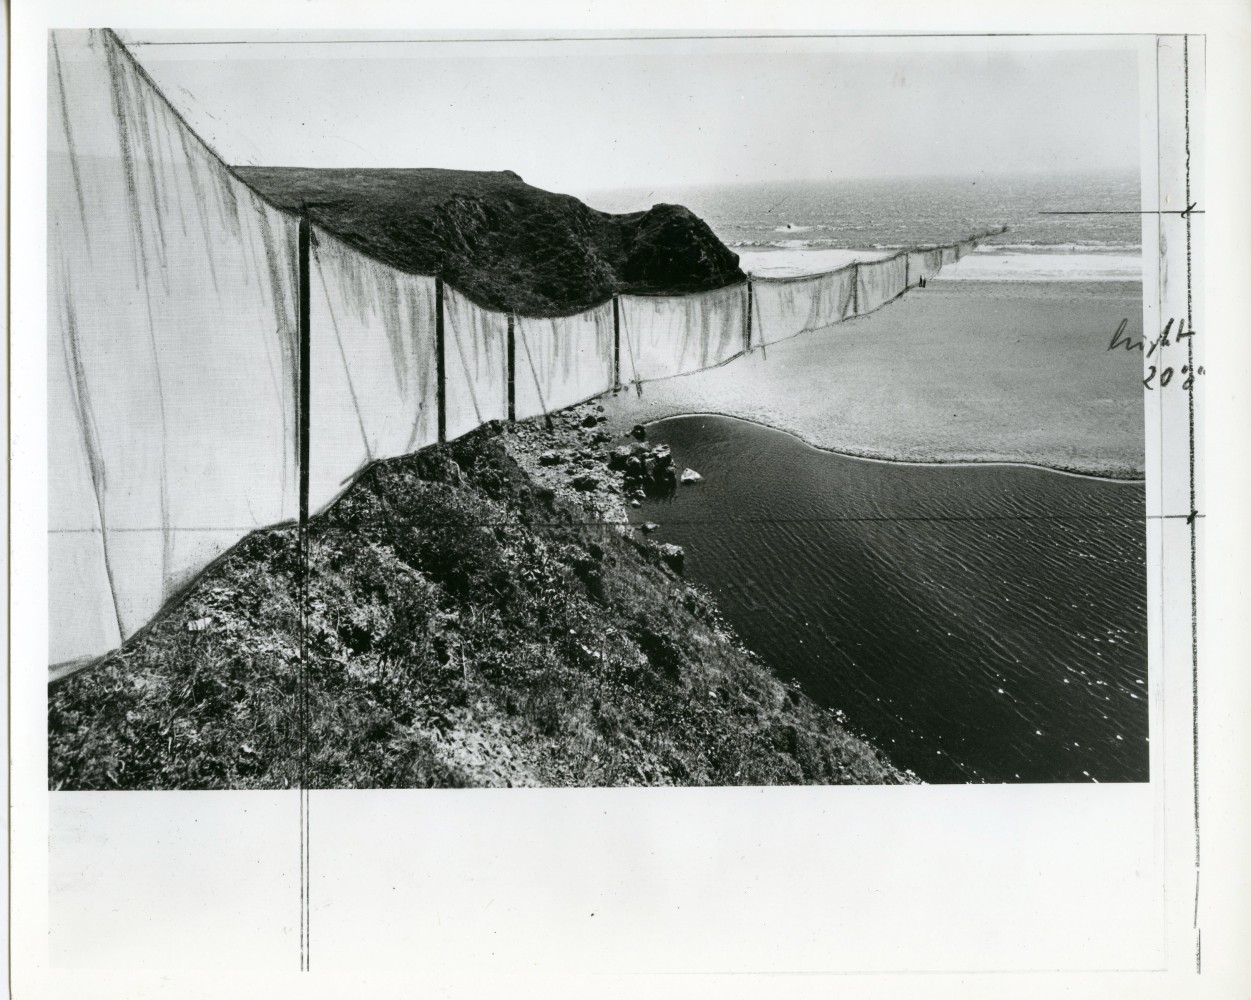 1973-74 Christo, detail of &quot;Running Fence (Project for Marin Sonoma County - California)&quot;